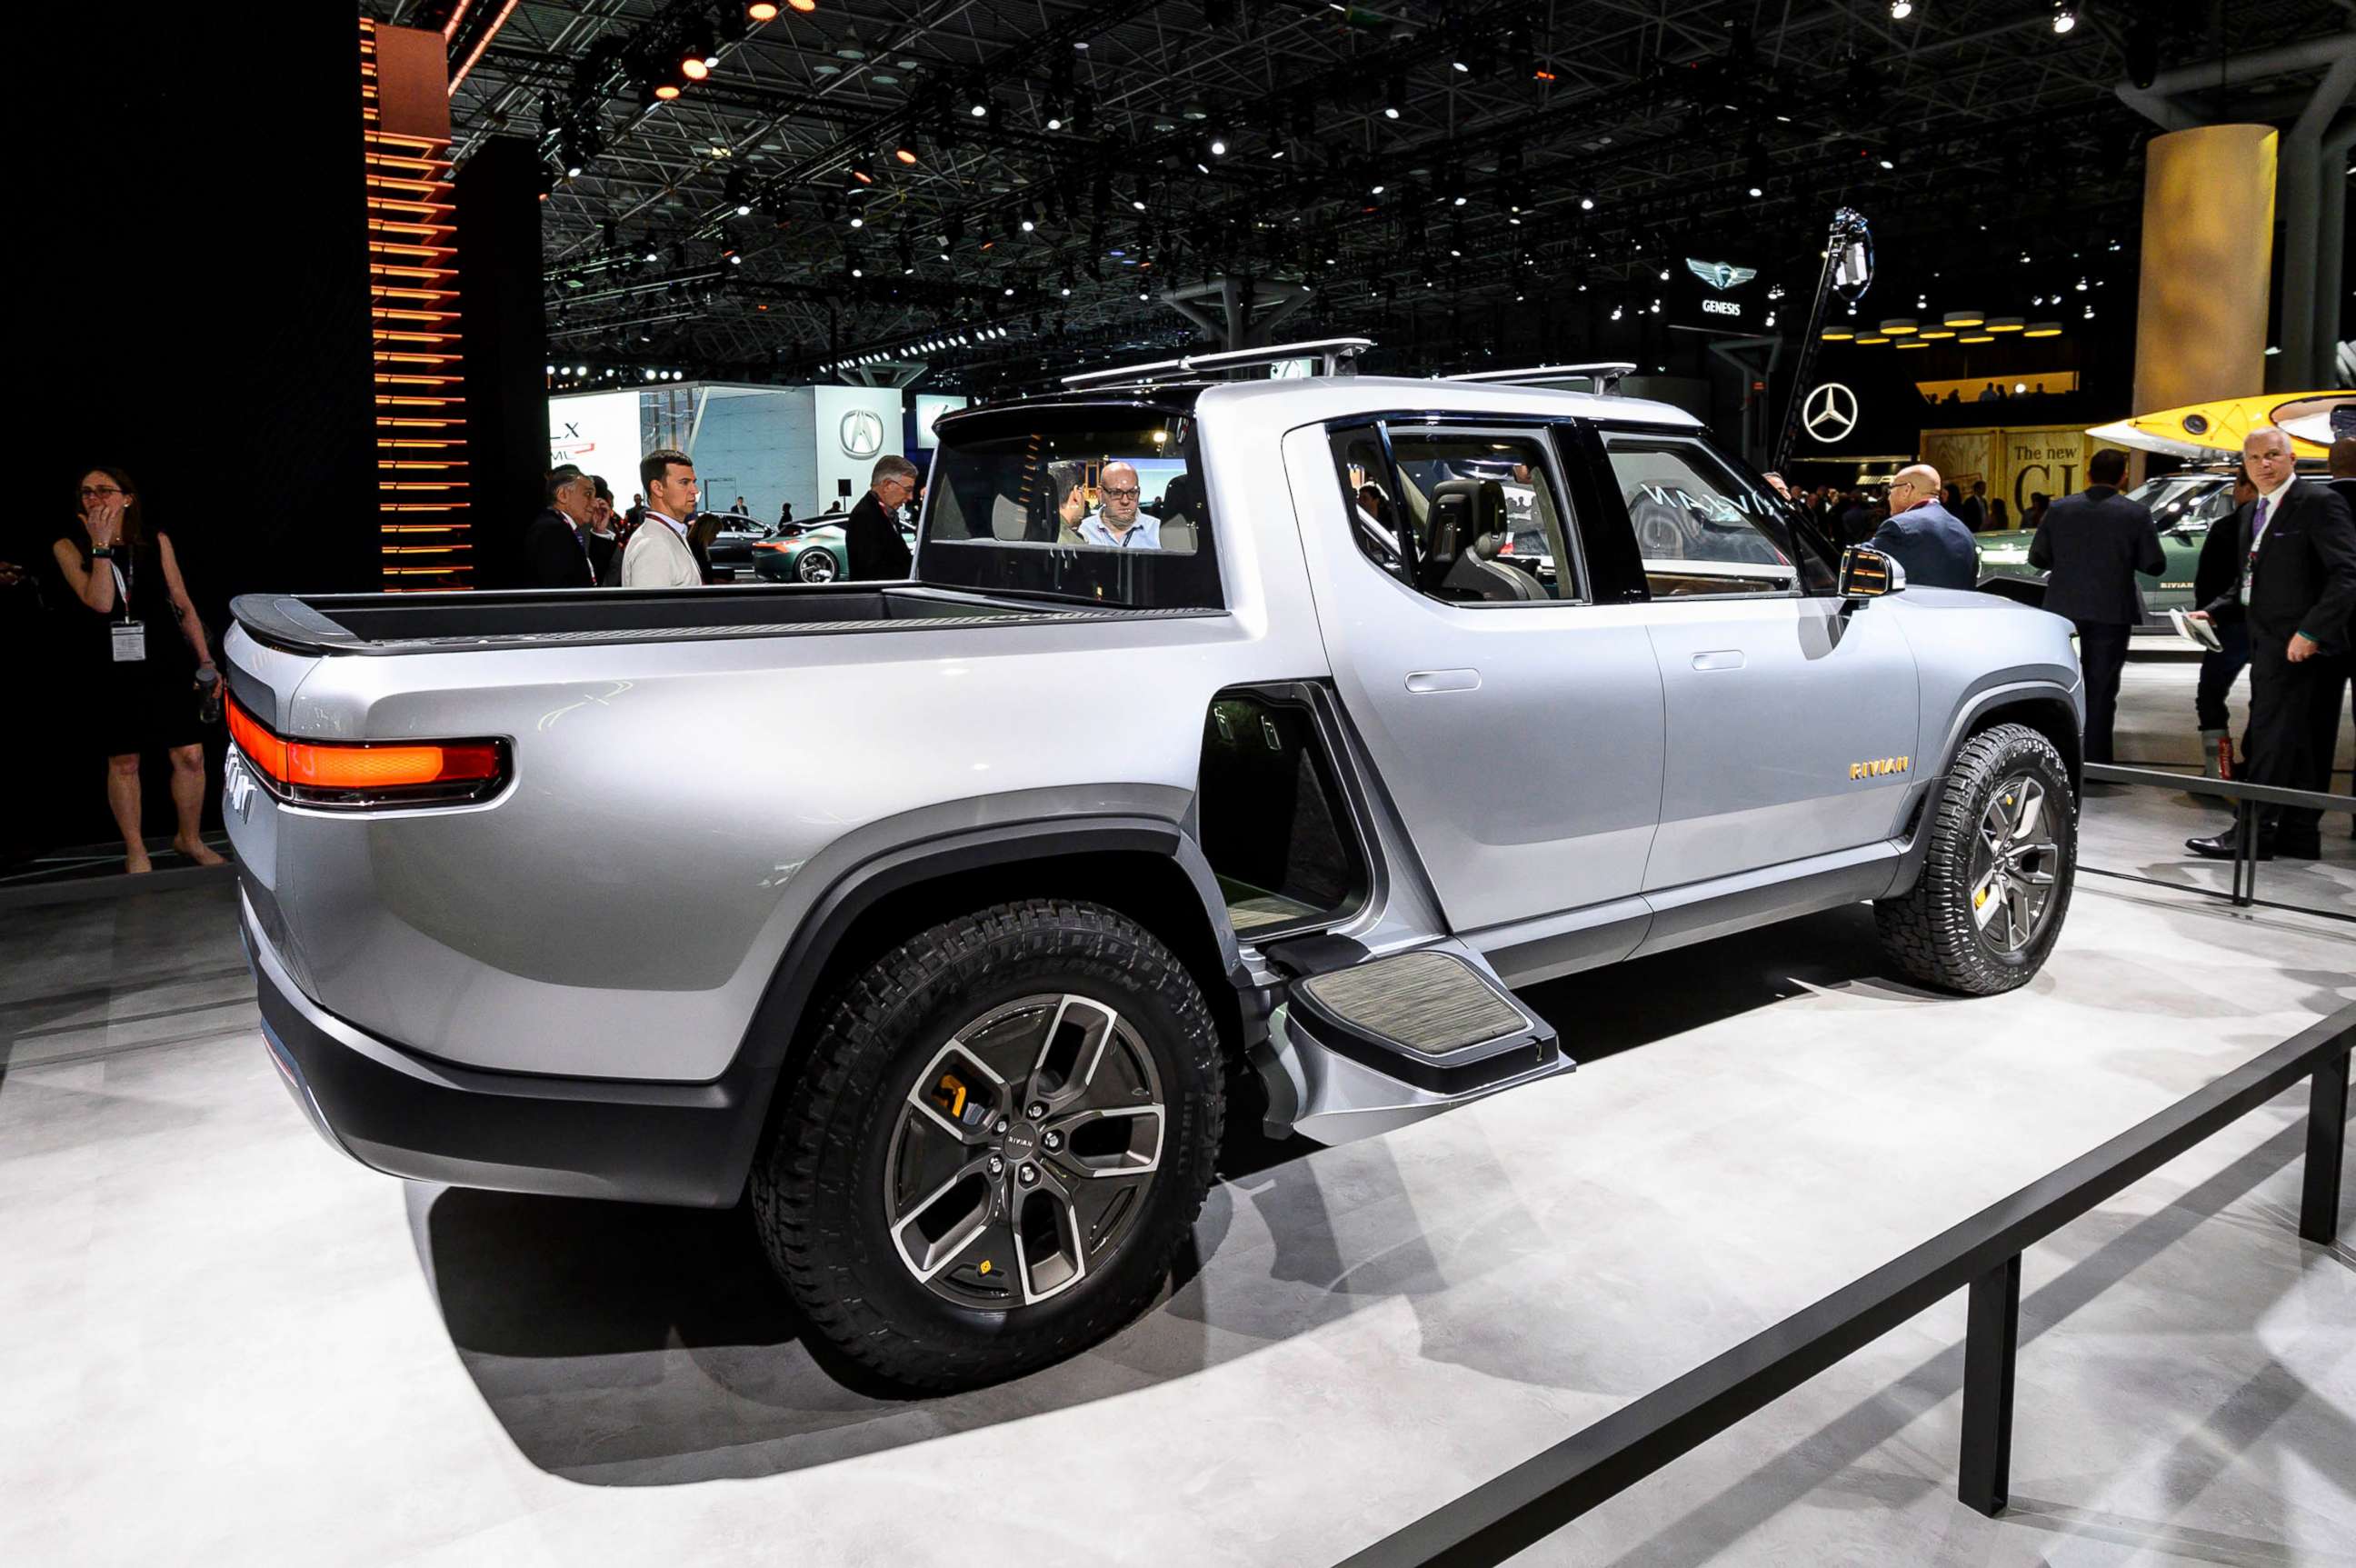 PHOTO: Rivian R1T seen at the New York International Auto Show at the Jacob K. Javits Convention Center in N.Y., April 17, 2019.